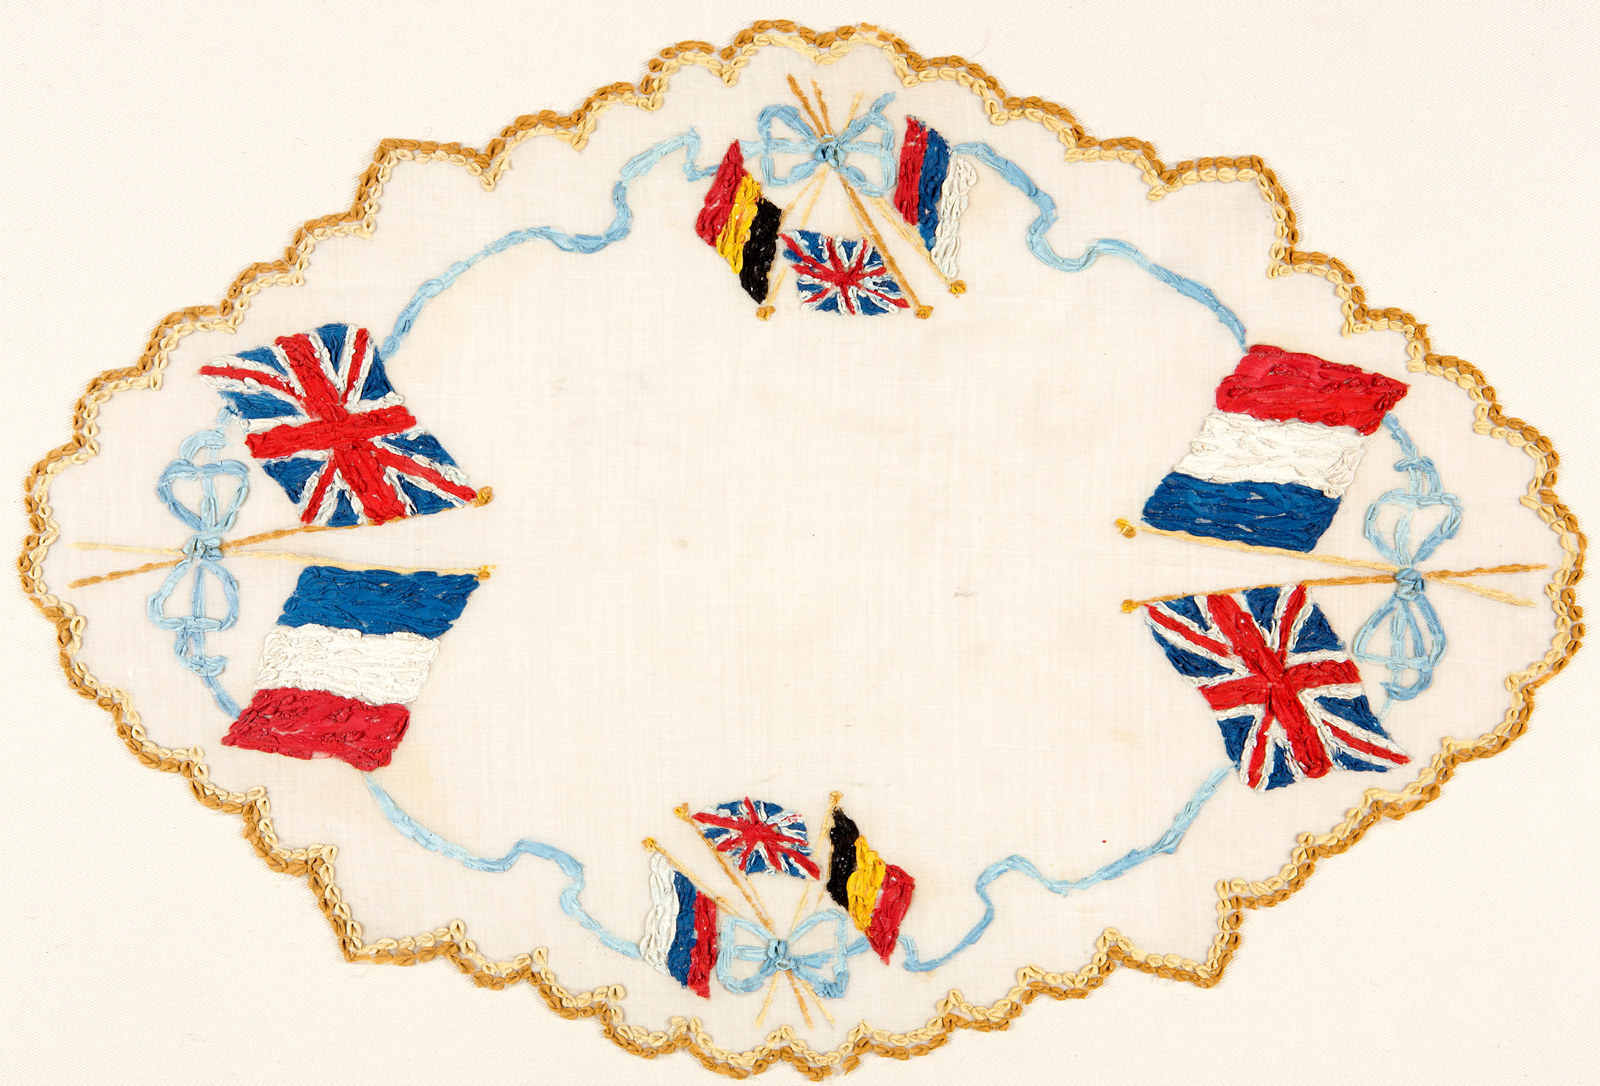 Cream doily with scalloped edge and hand painted with flag designs.